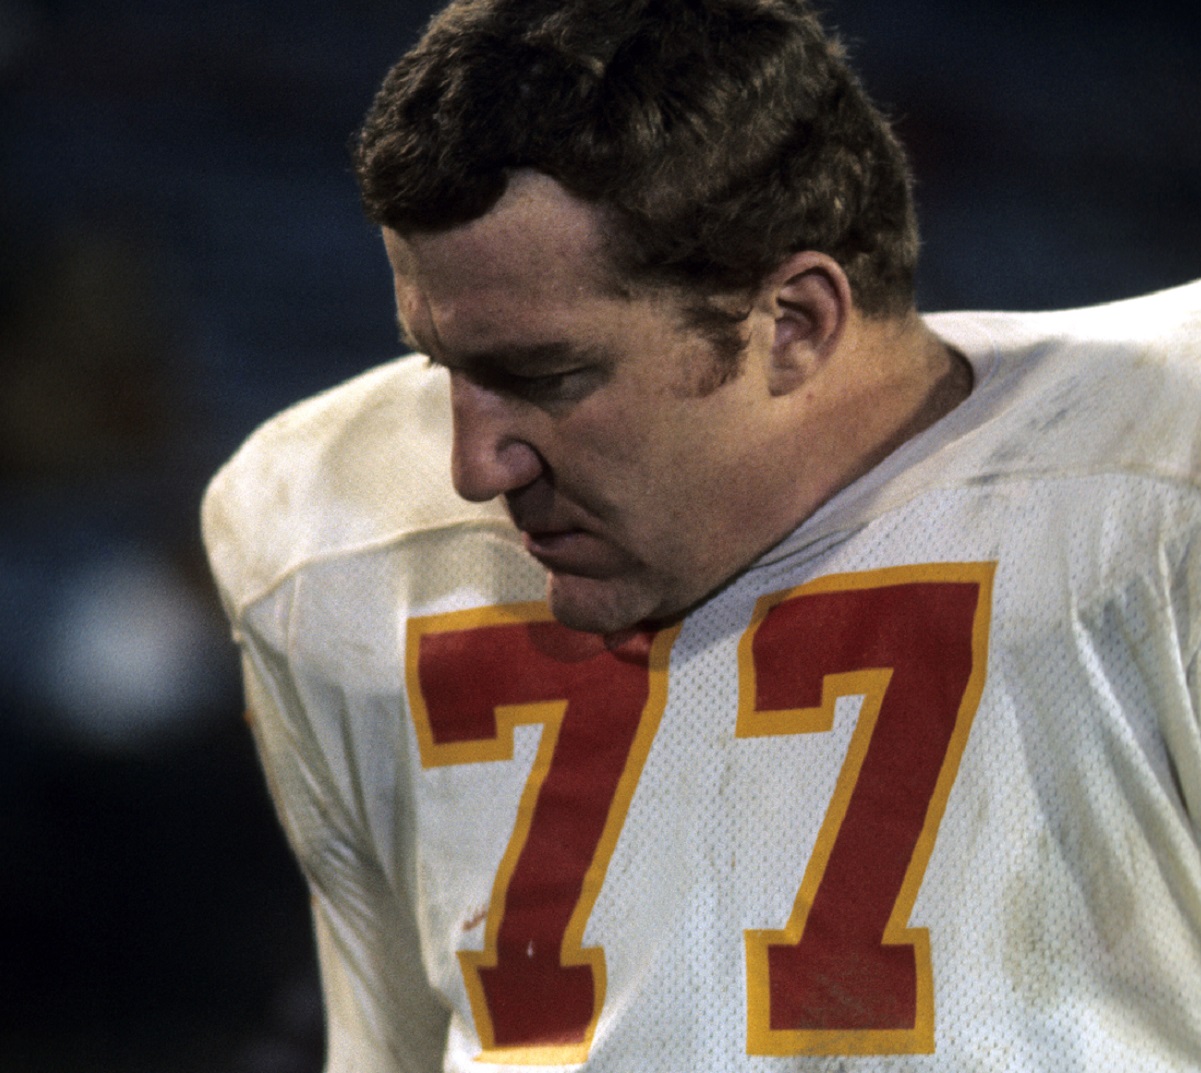 Ohio State All-American and Kansas City Chiefs Super Bowl Champion Jim Tyrer Killed His Wife and Then Himself in a Horrific Murder-Suicide